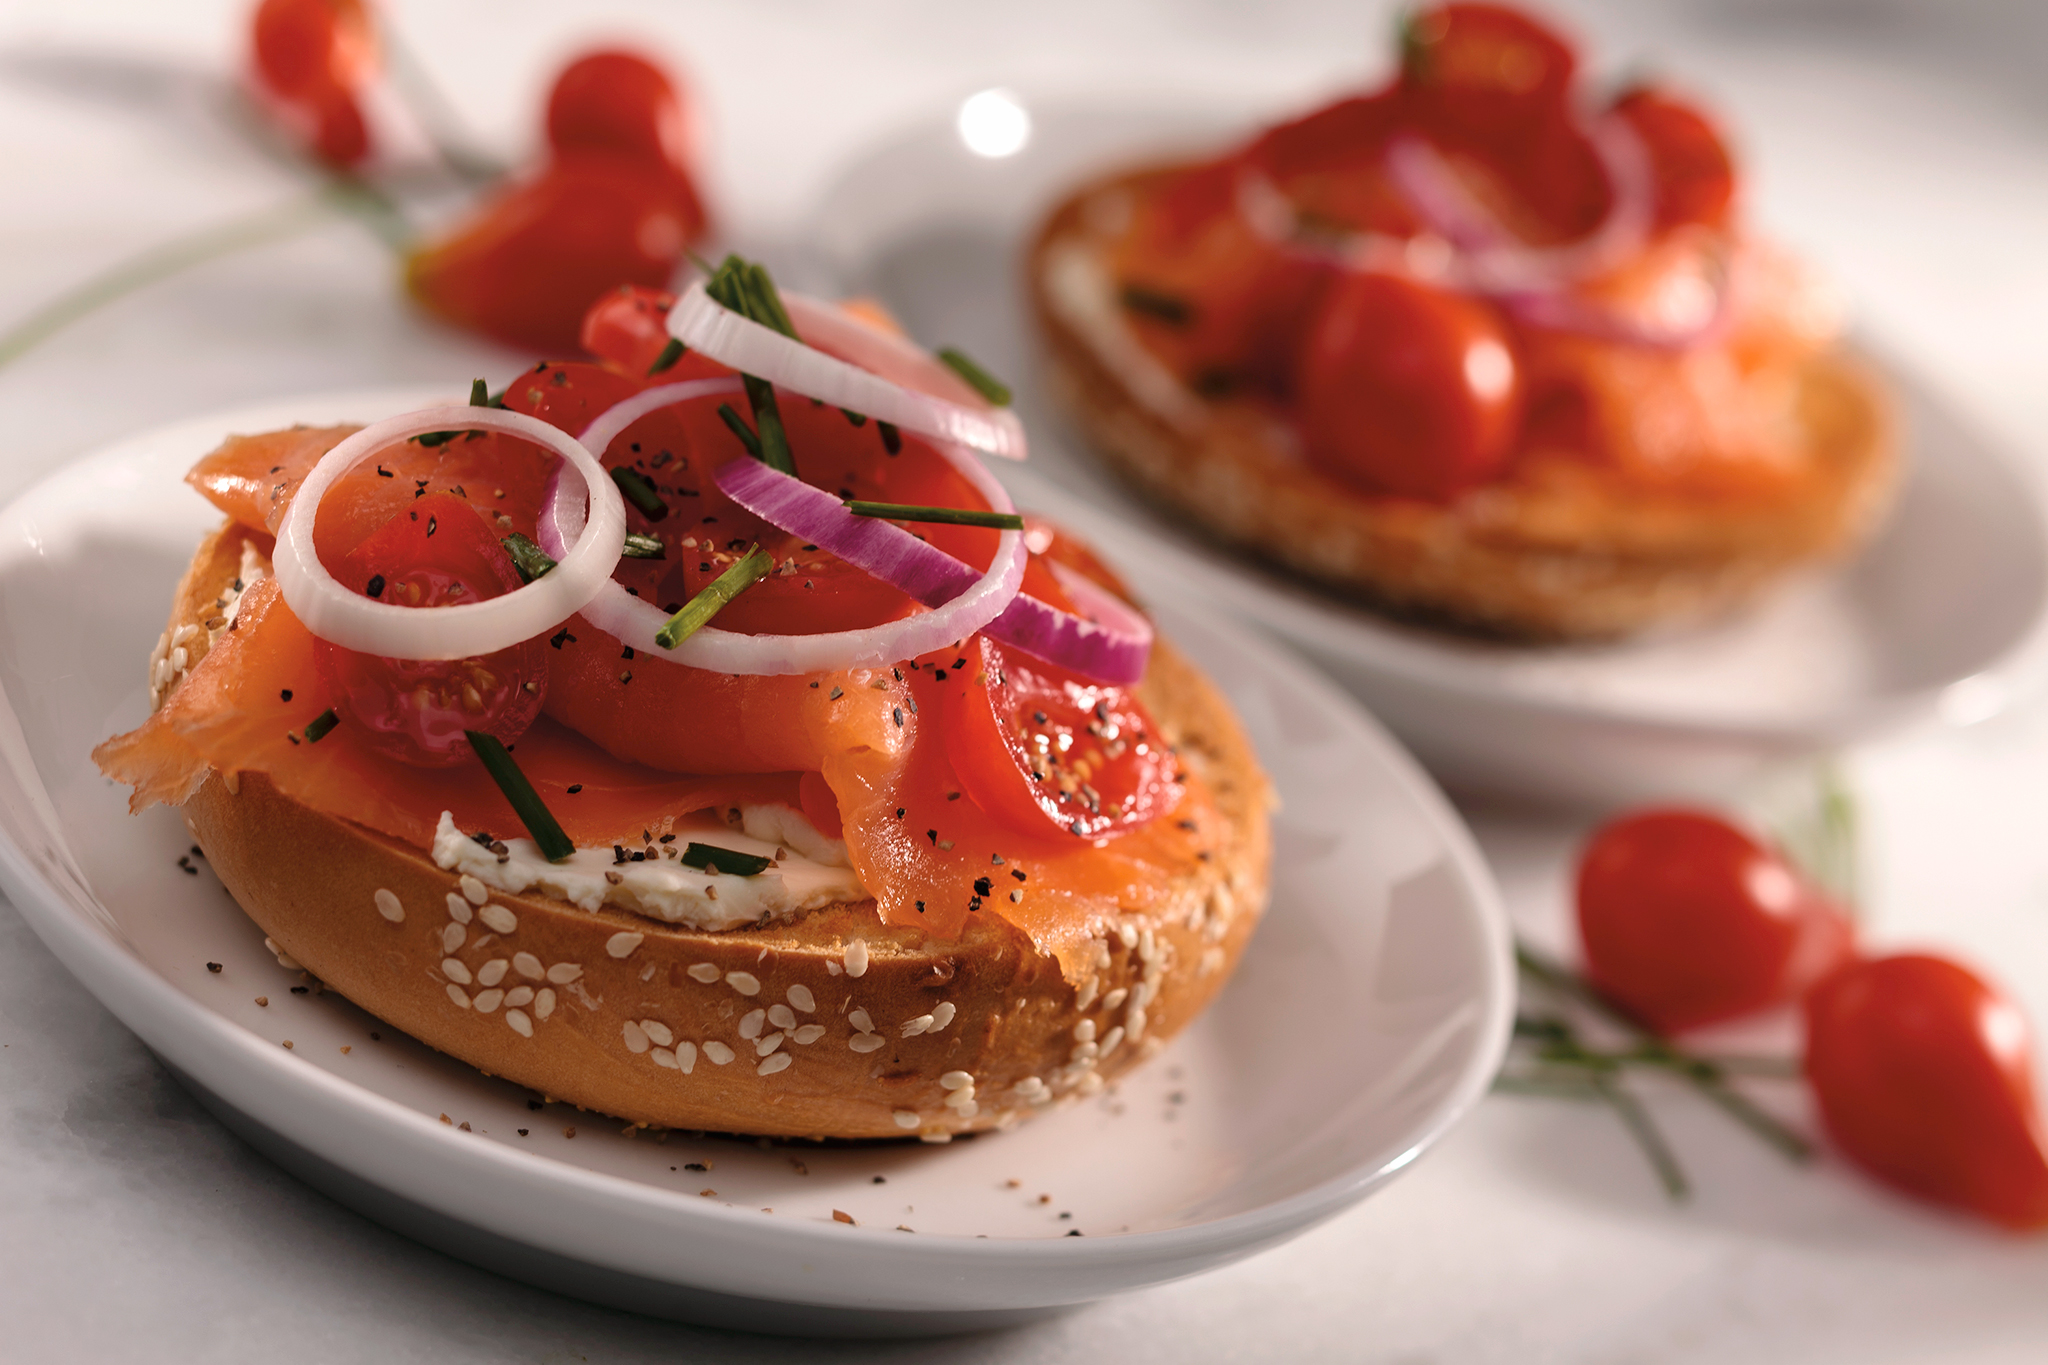 Bagels with lox and dill-scallion cream cheese